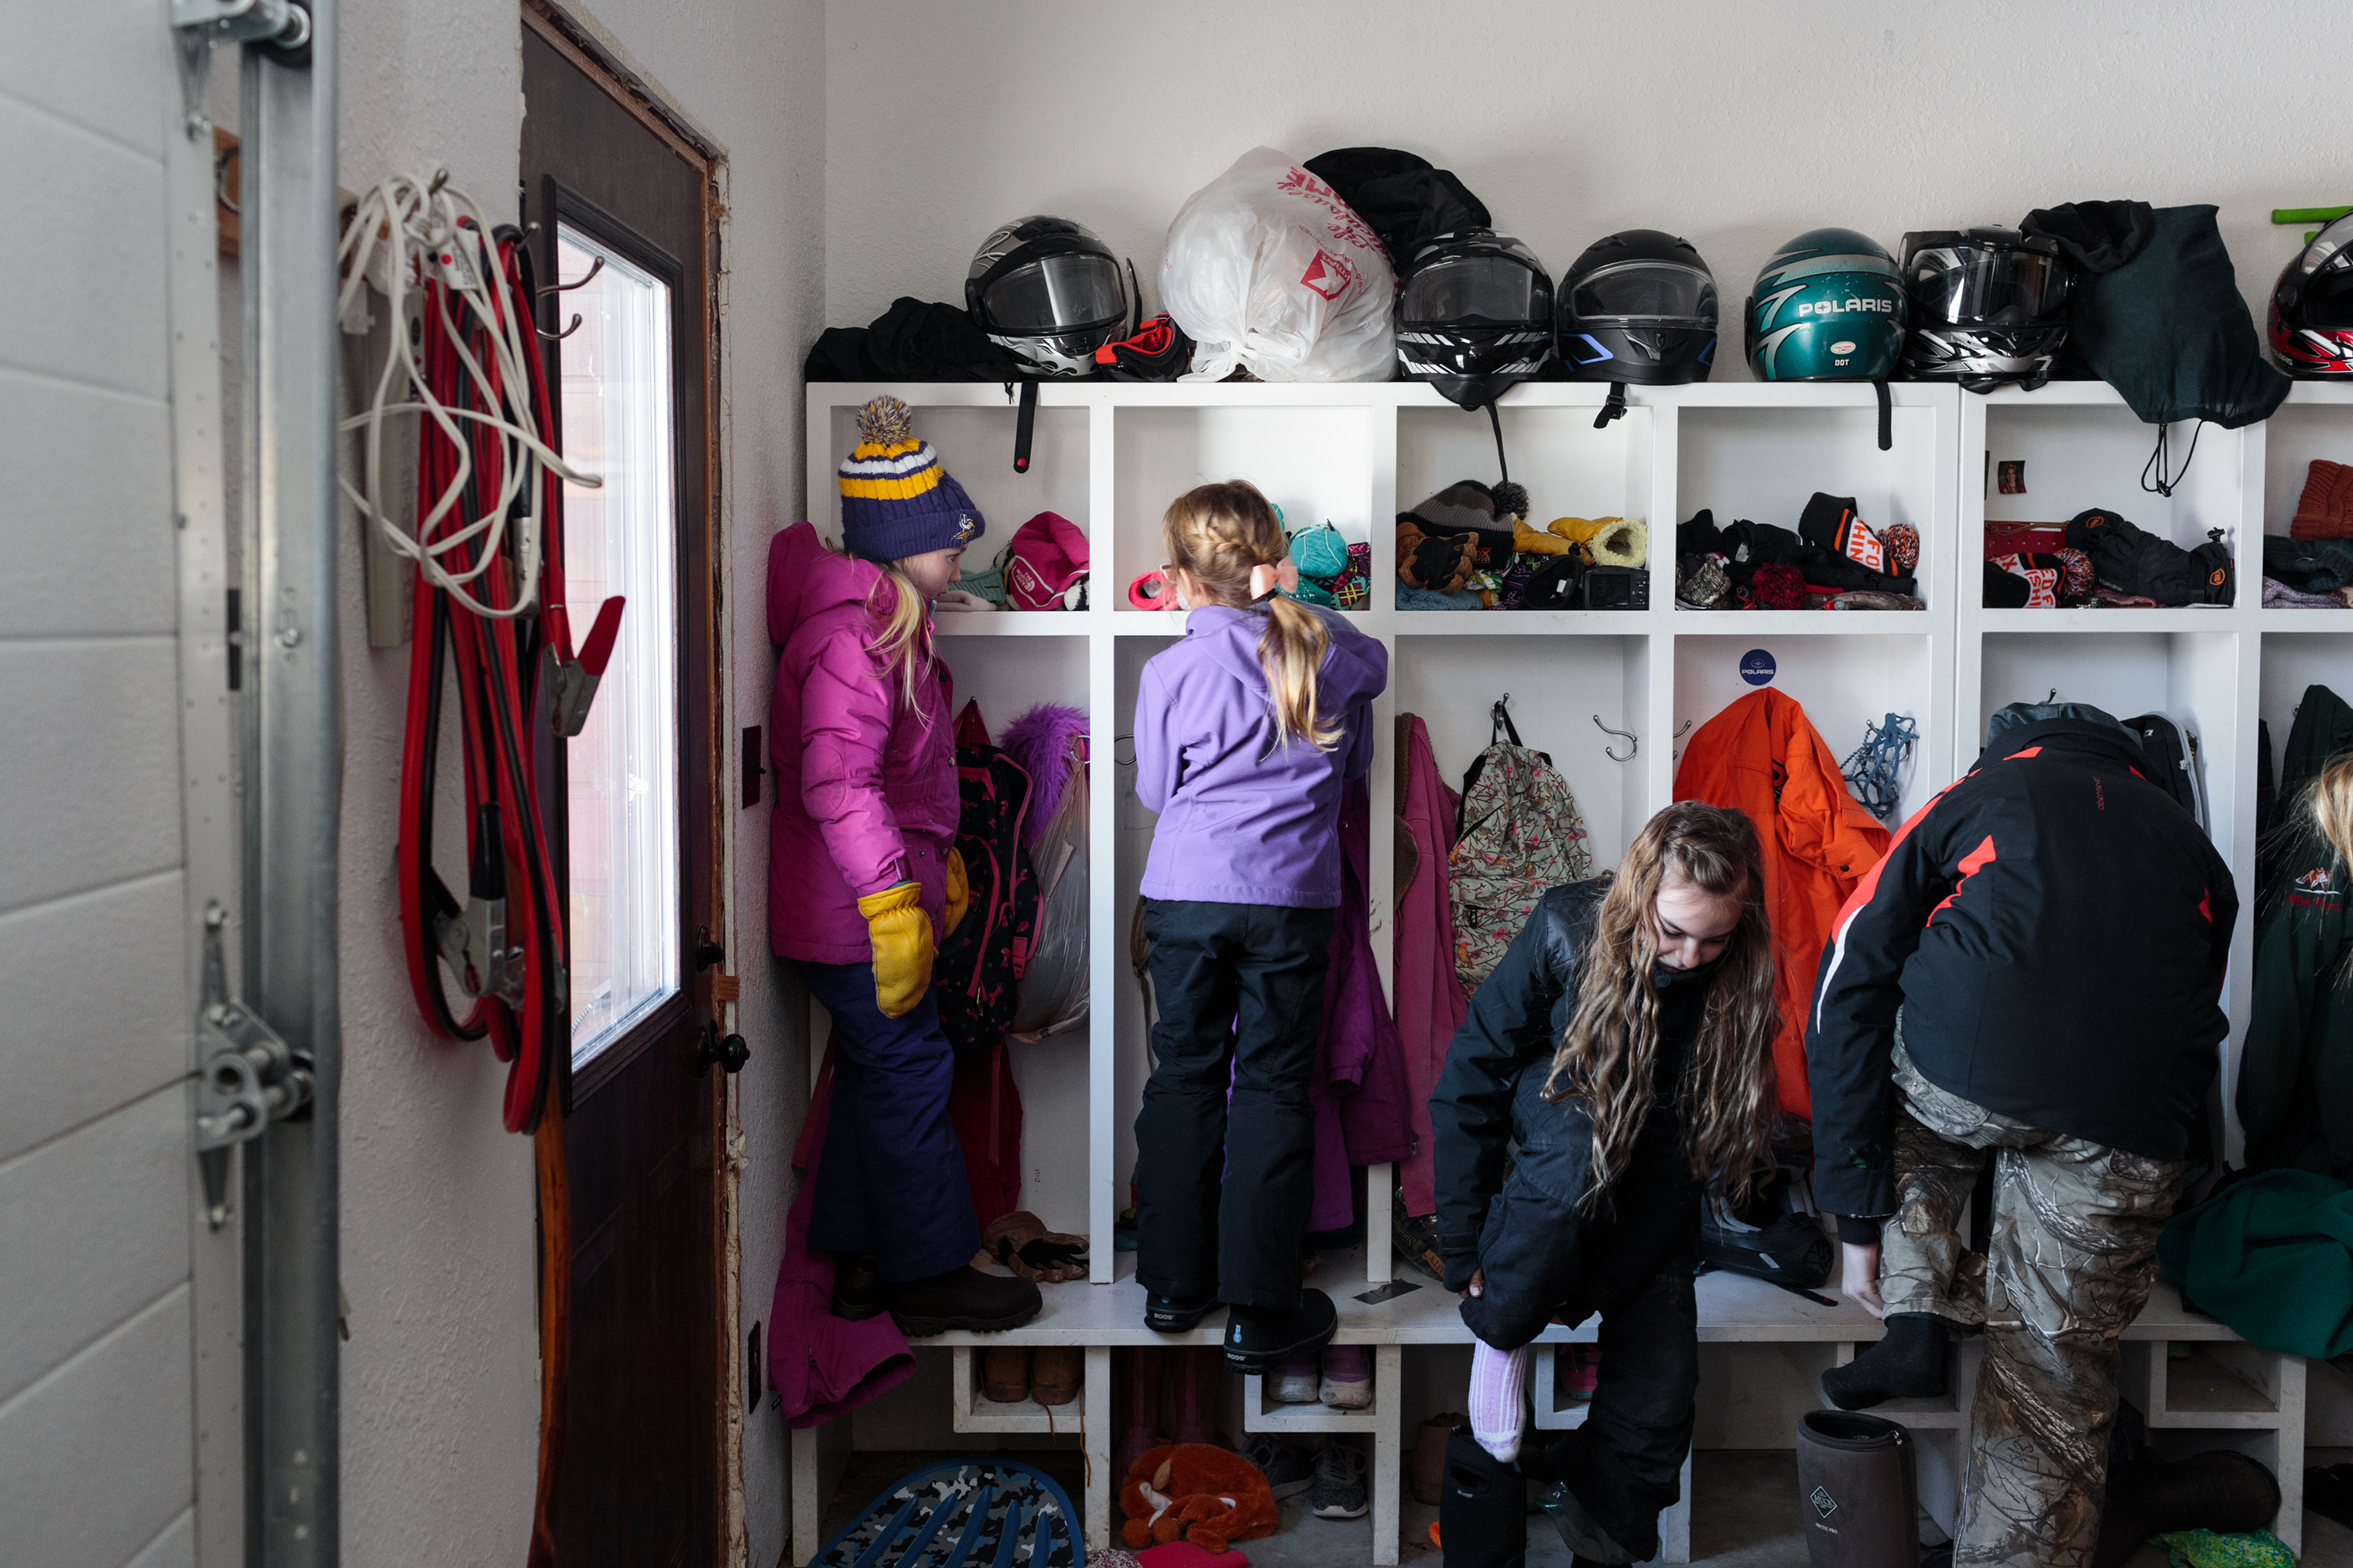 The Goulet family dresses in warm winter clothes before heading outside to play. The Goulet family has eight children, and operate the Angle Outpost Resort in Angle Inlet, offering lodges and outdoor activities such as ice fishing and hunting. They all have attended or are attending the Angle Inlet School. (Sarah Blesener for TIME)